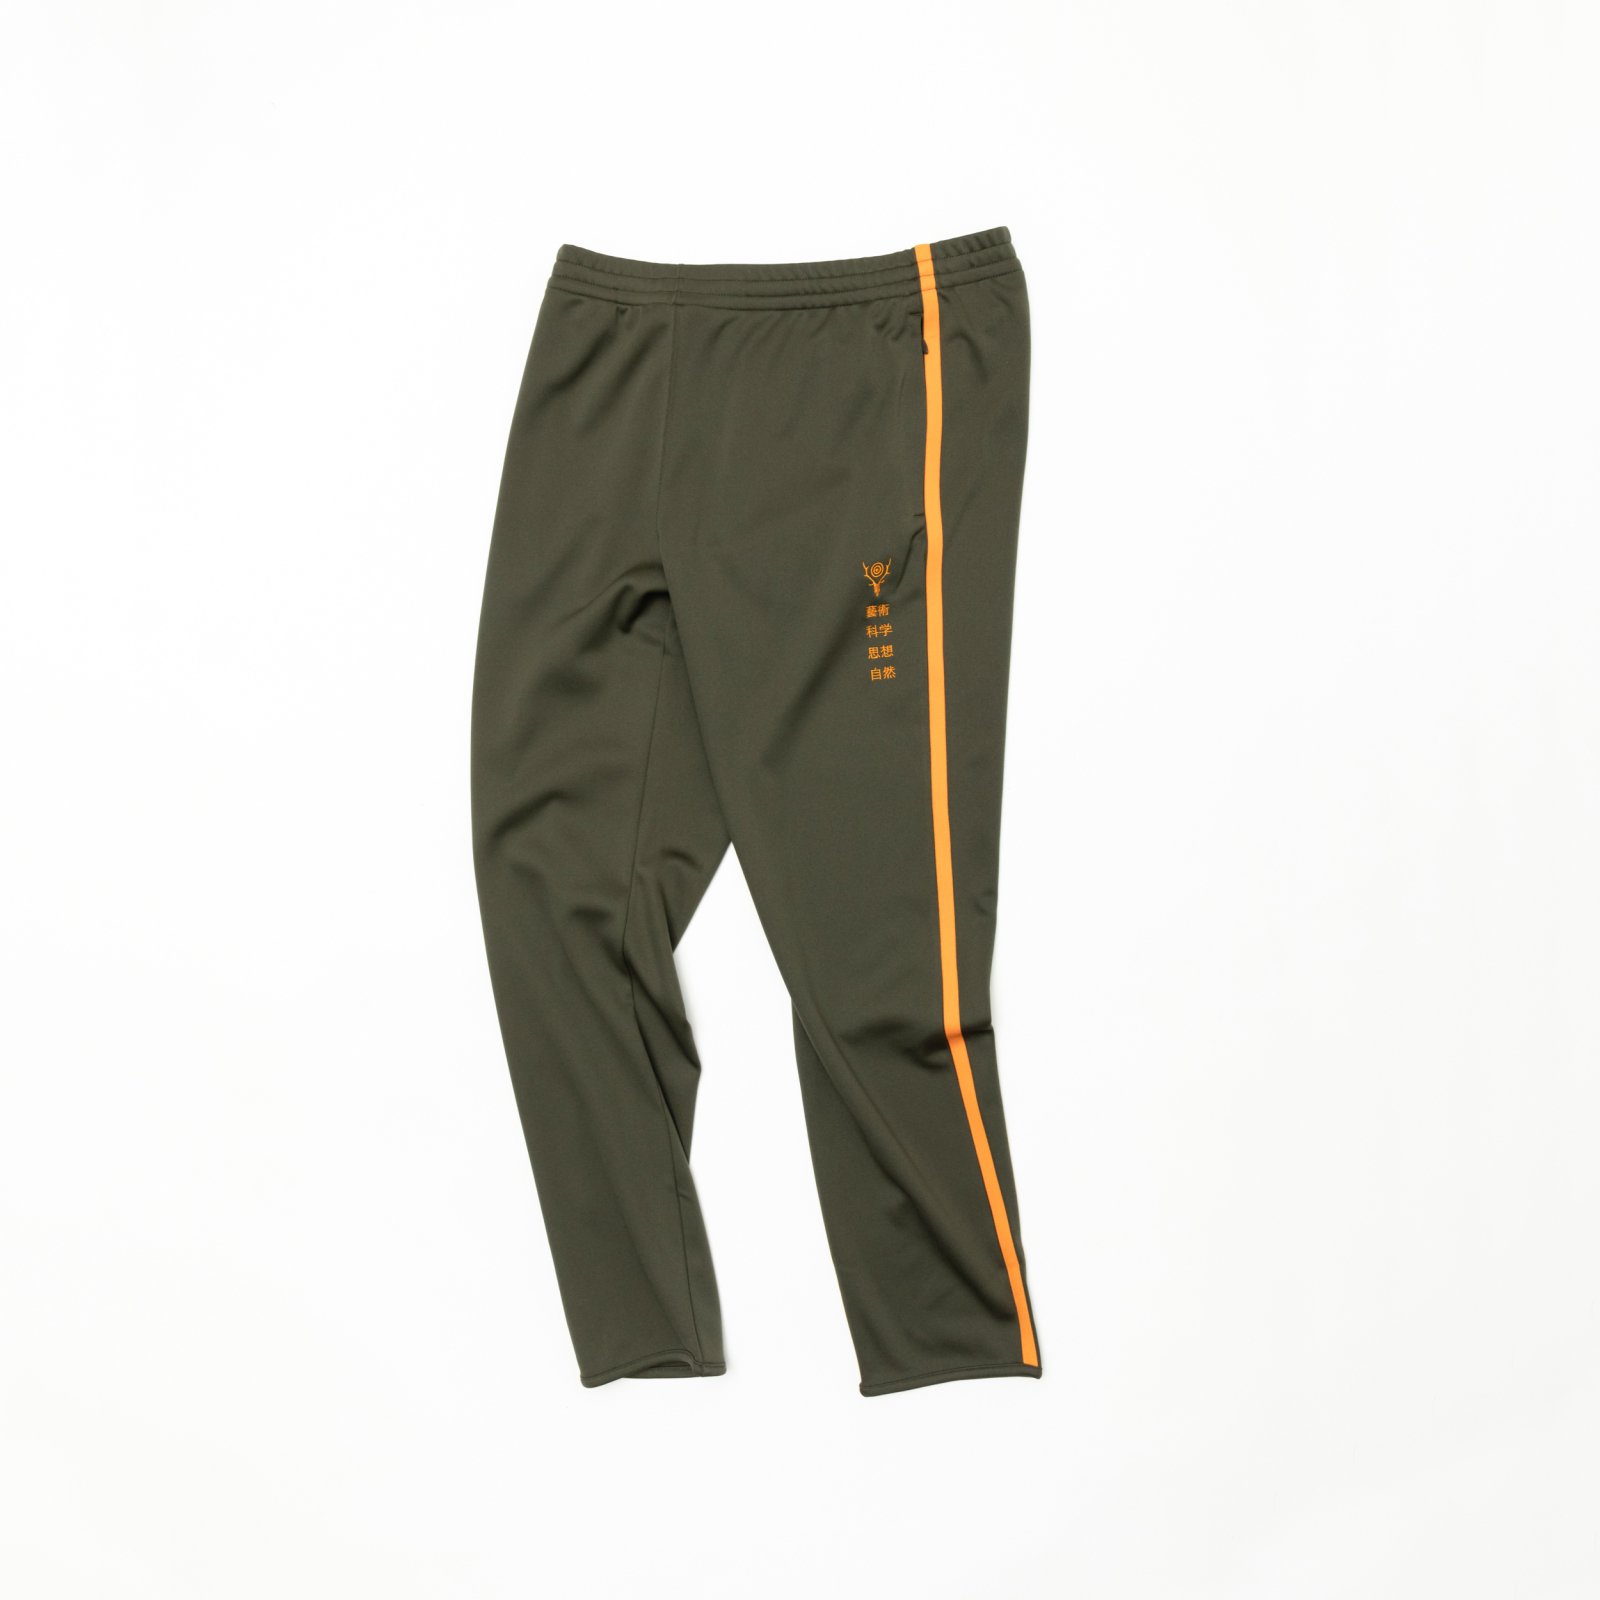 SOUTH2 WEST8 x TACOMA FUJI RECORDS Trainer Pant - Poly Smooth 